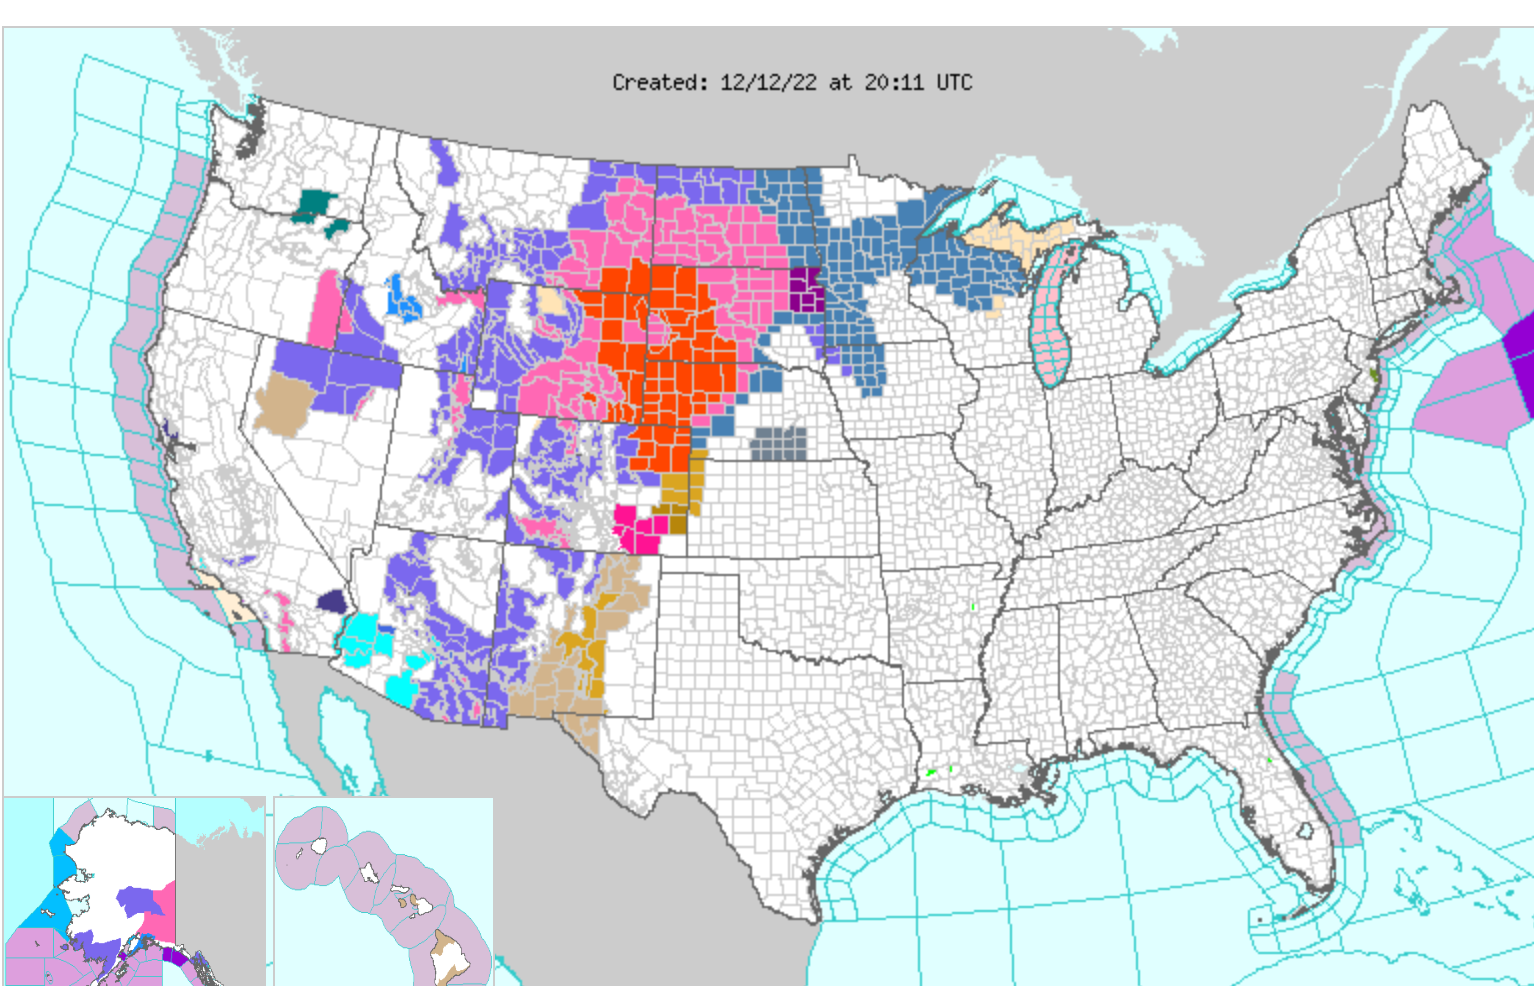 Blizzard and winter storm warnings are in place for 10 million people across more than 12 states on Monday